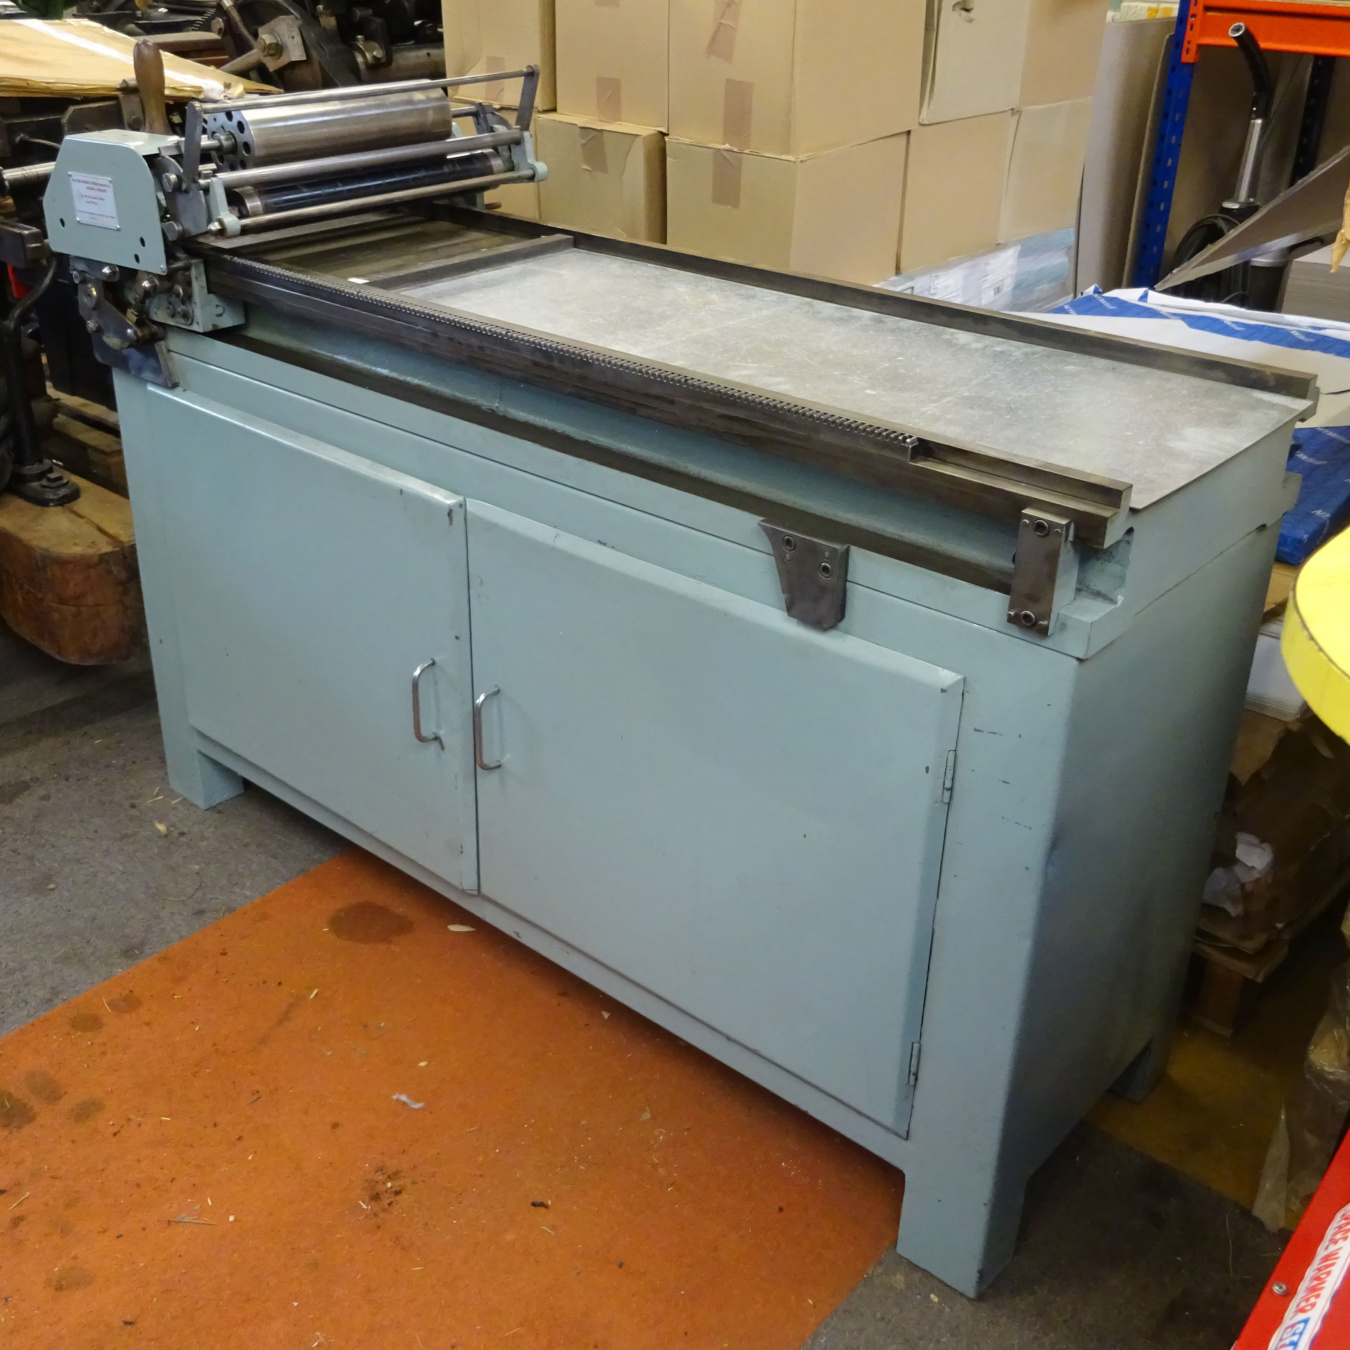 Western Number 5 galley proofing press for sale